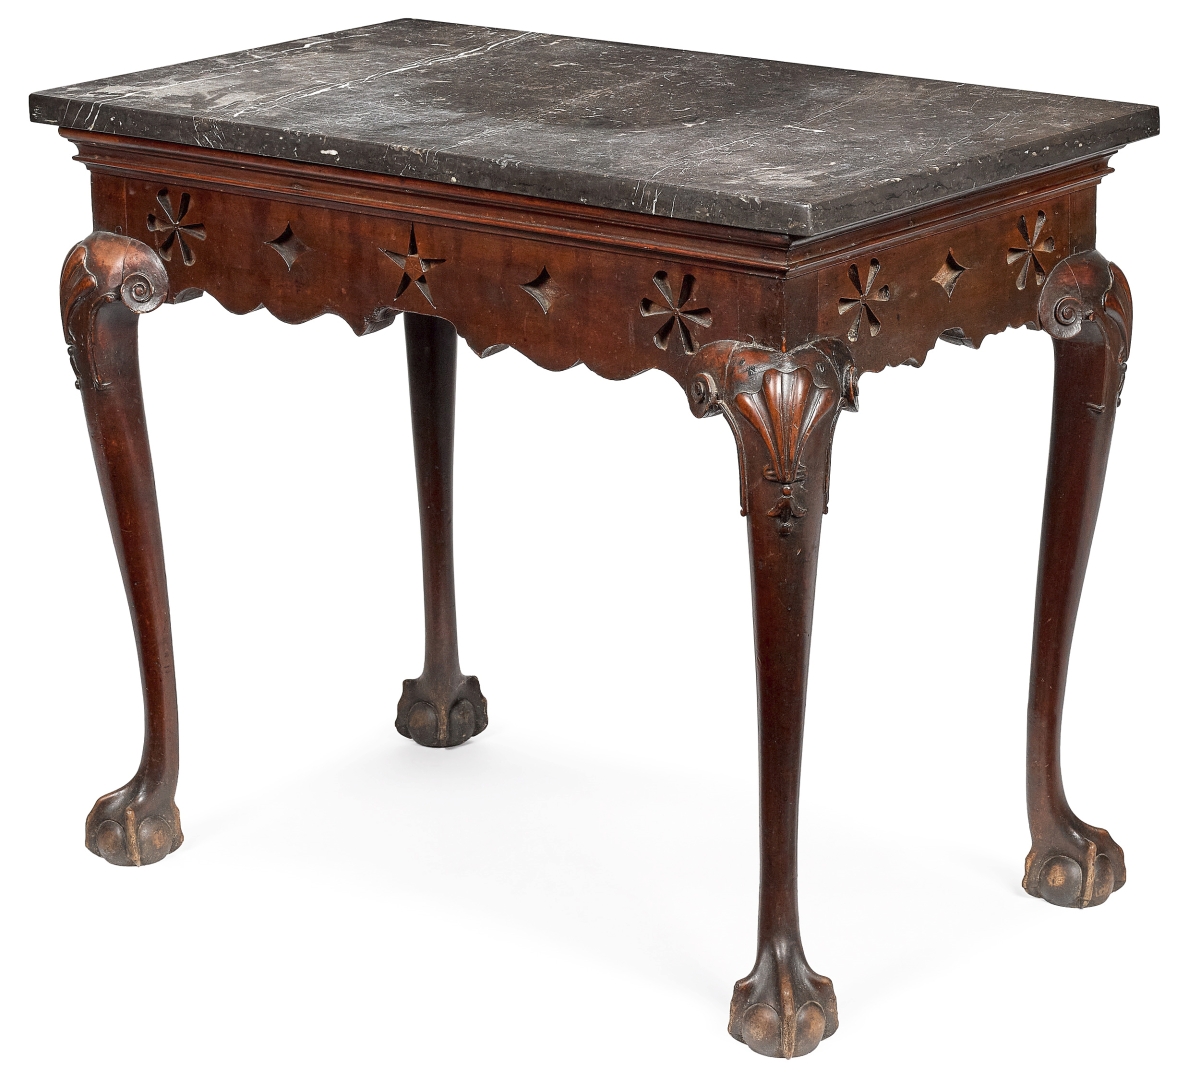 Despite a replaced marble top, repaired leg and replaced returns, this Chippendale cherry slab table soared to $54,120 from a trade buyer in the room. It was probably made in Massachusetts, circa 1760 ($8/12,000).